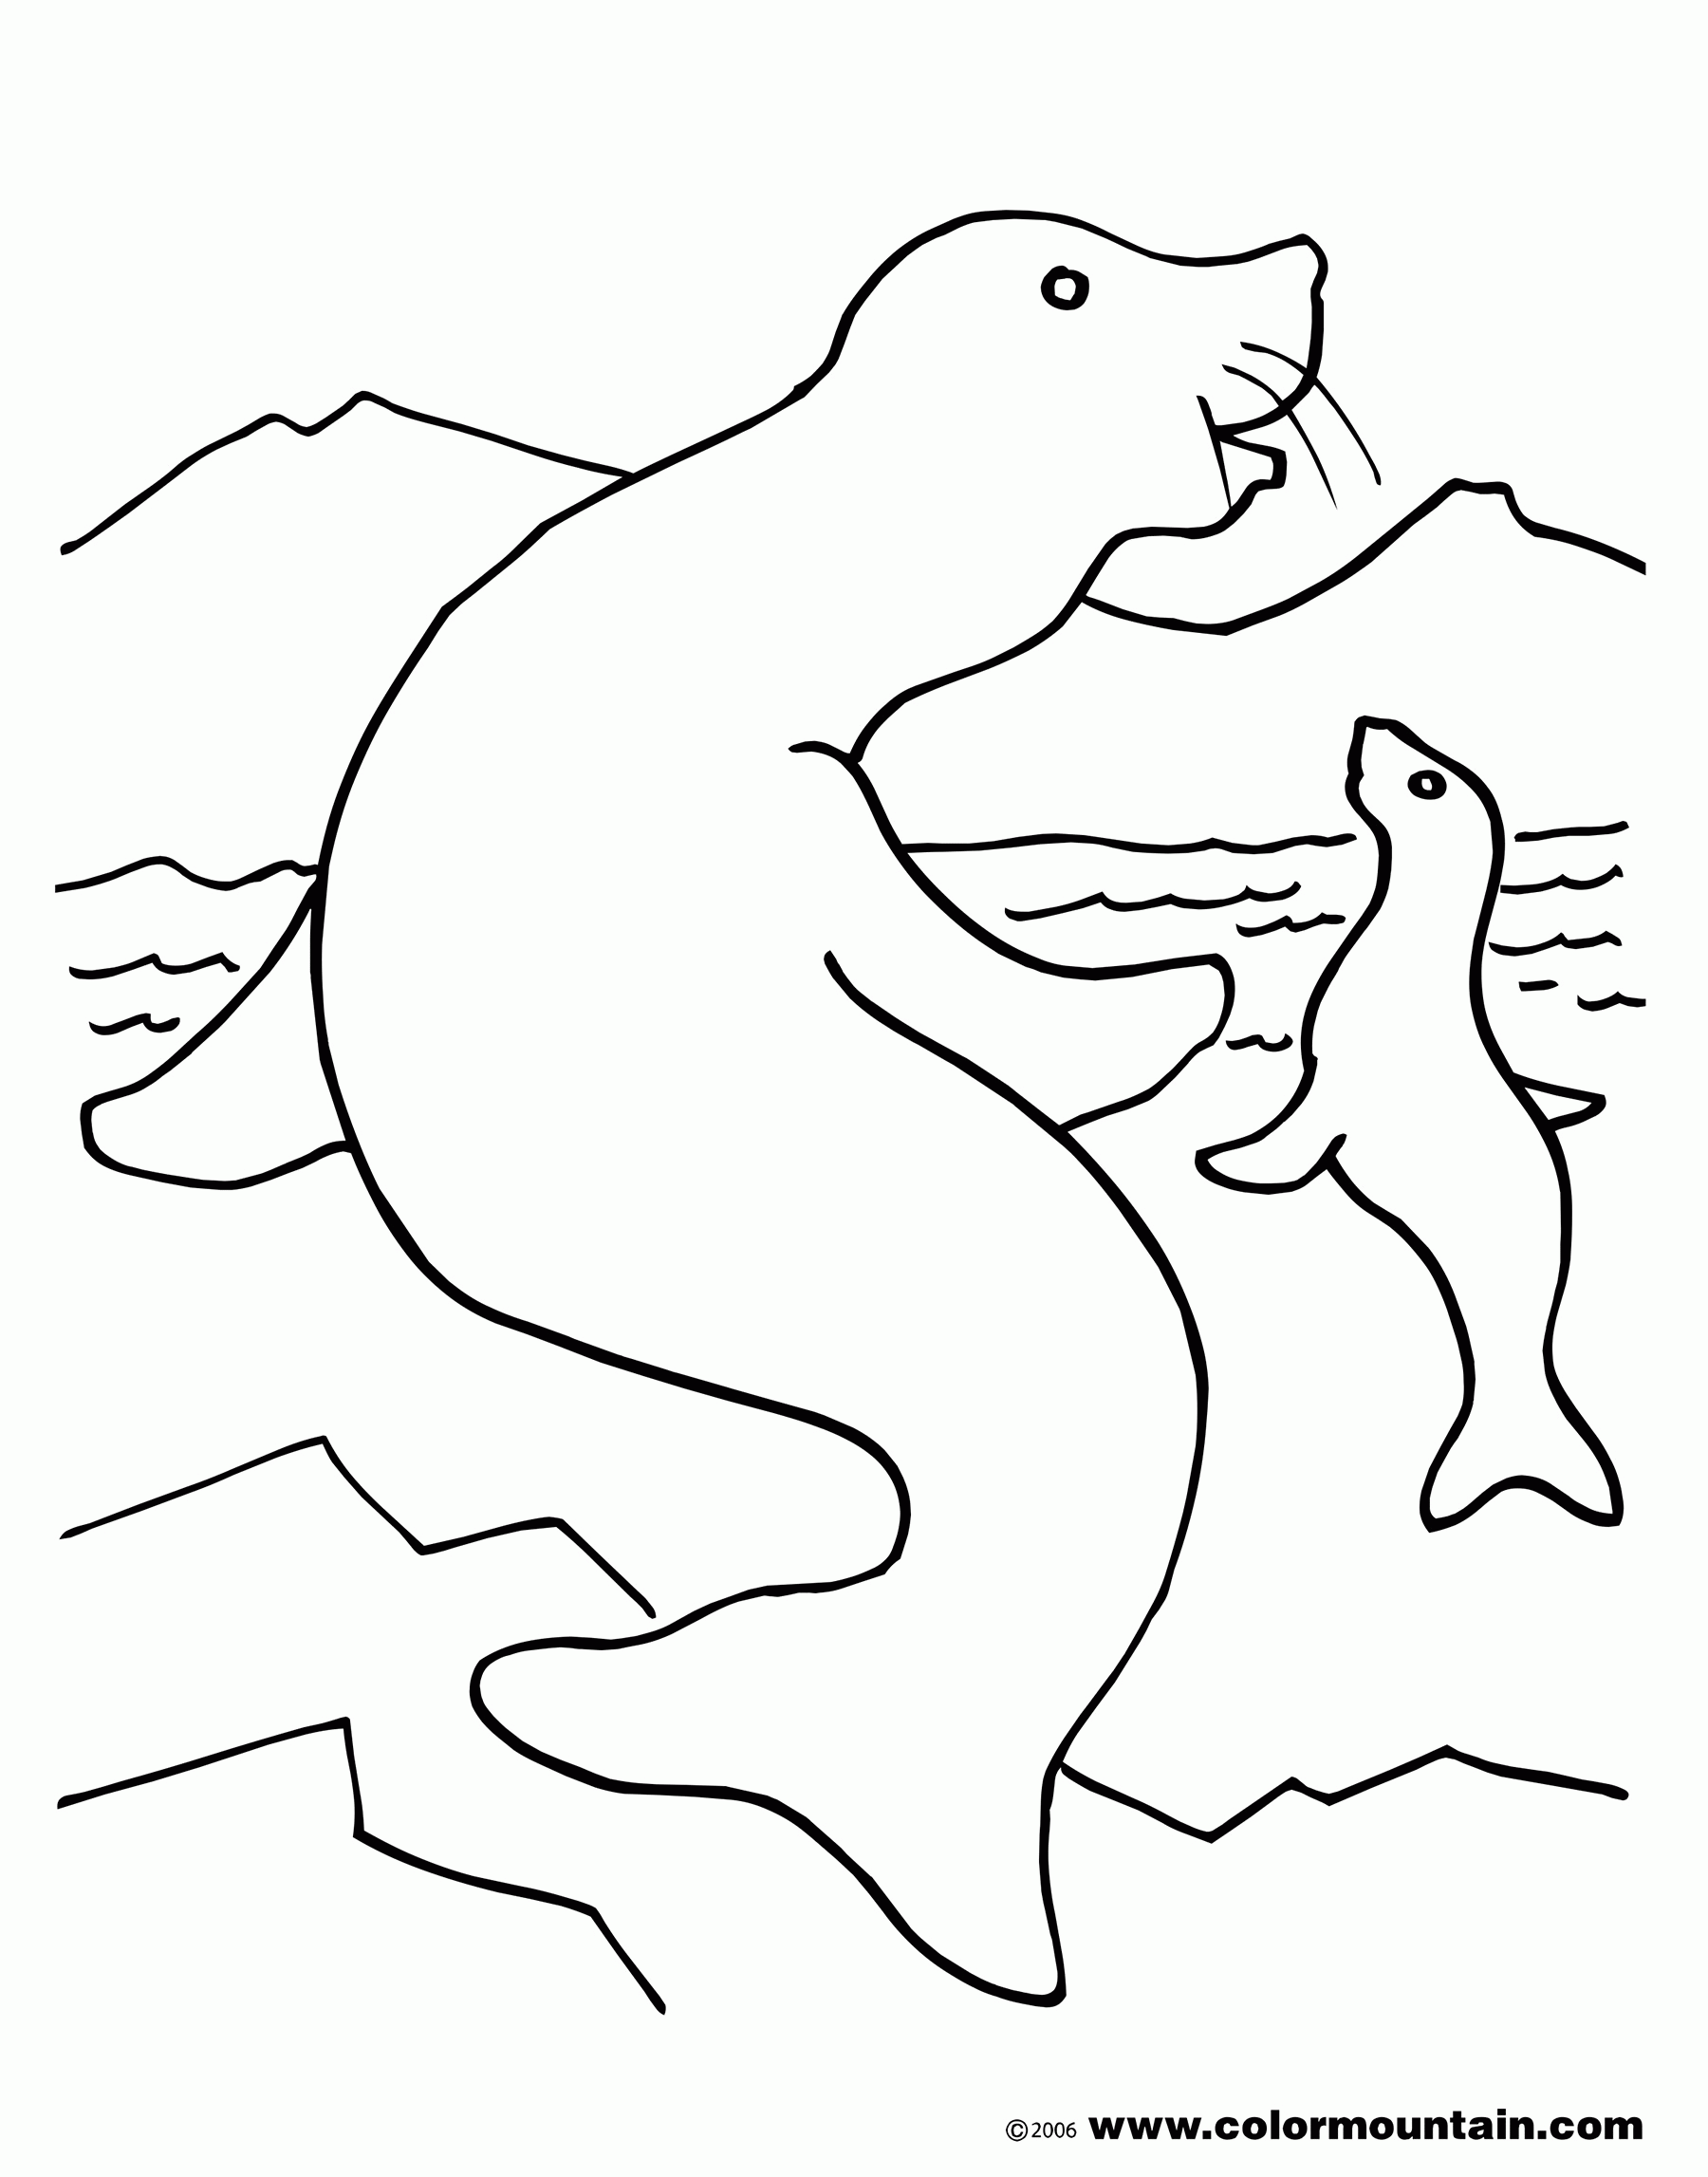 Swimming Seal Color Sheet - Create A Printout Or Activity